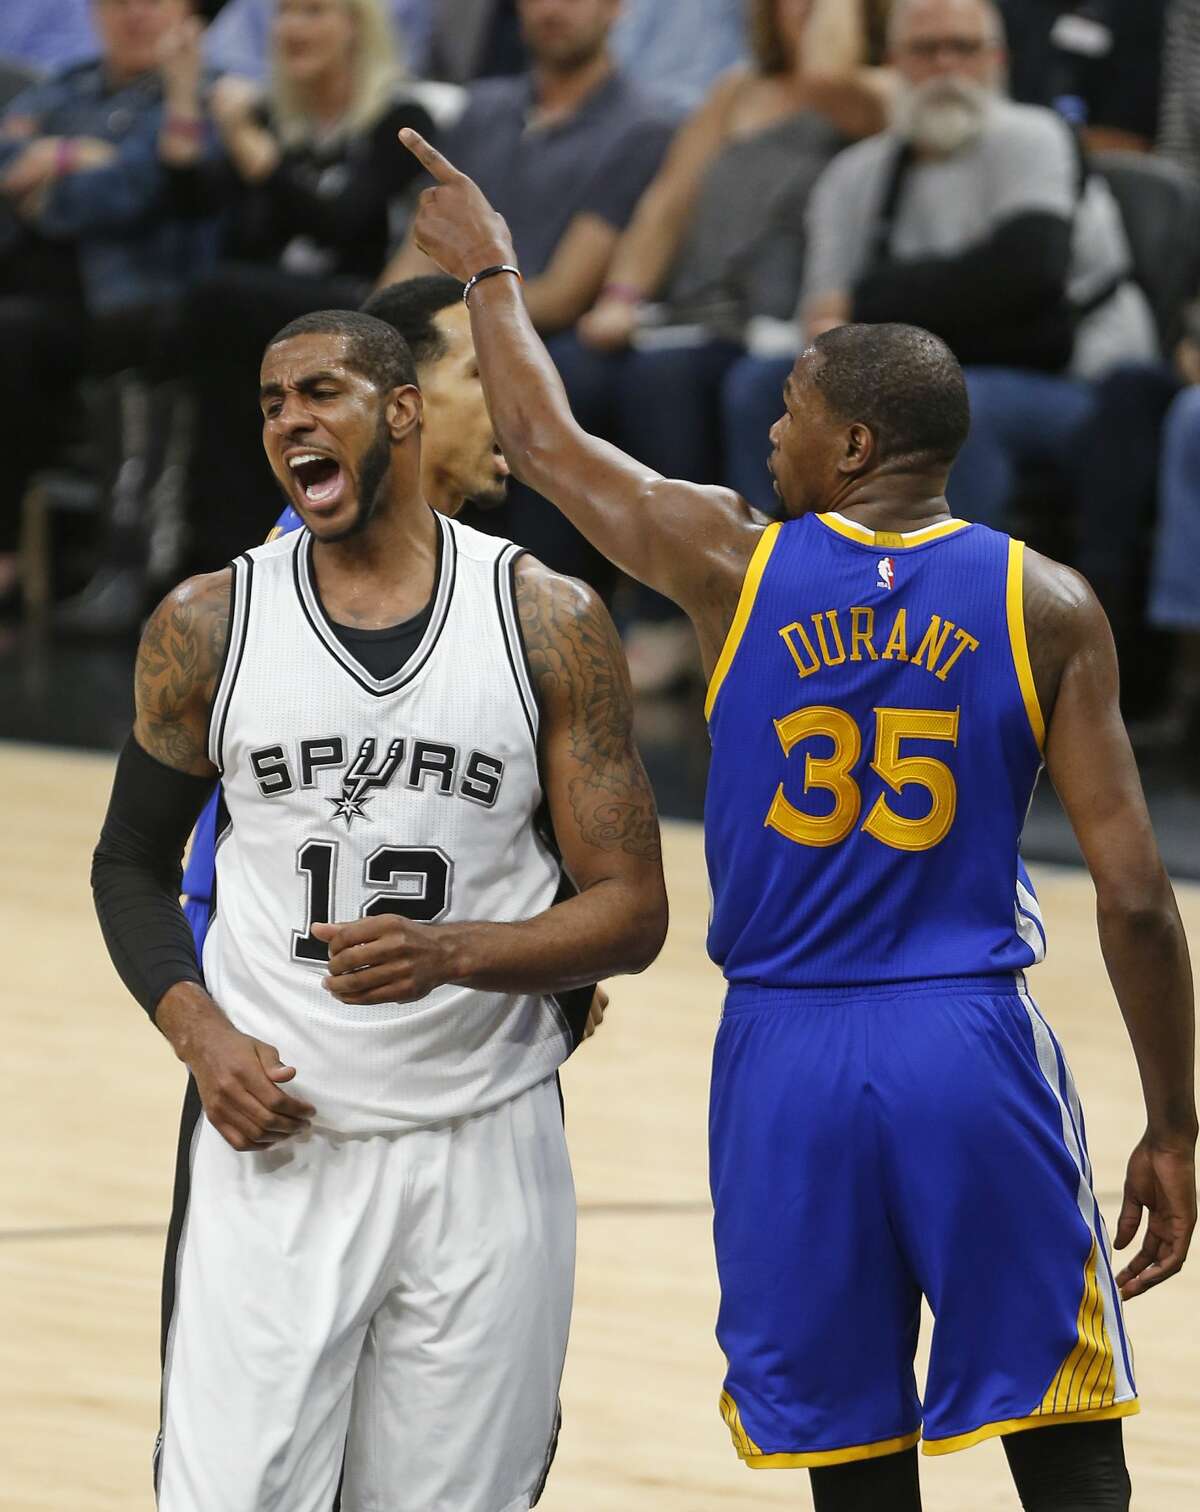 San Antonio Spurs forward LaMarcus Aldridge(12) reacts after missing a shot as Golden State Warriors forward Kevin Durant (35) gestures during the first half in Game 3 of the NBA basketball Western Conference finals on Saturday, May 20, 2017, in San Antonio. (AP Photo/Ronald Cortes)